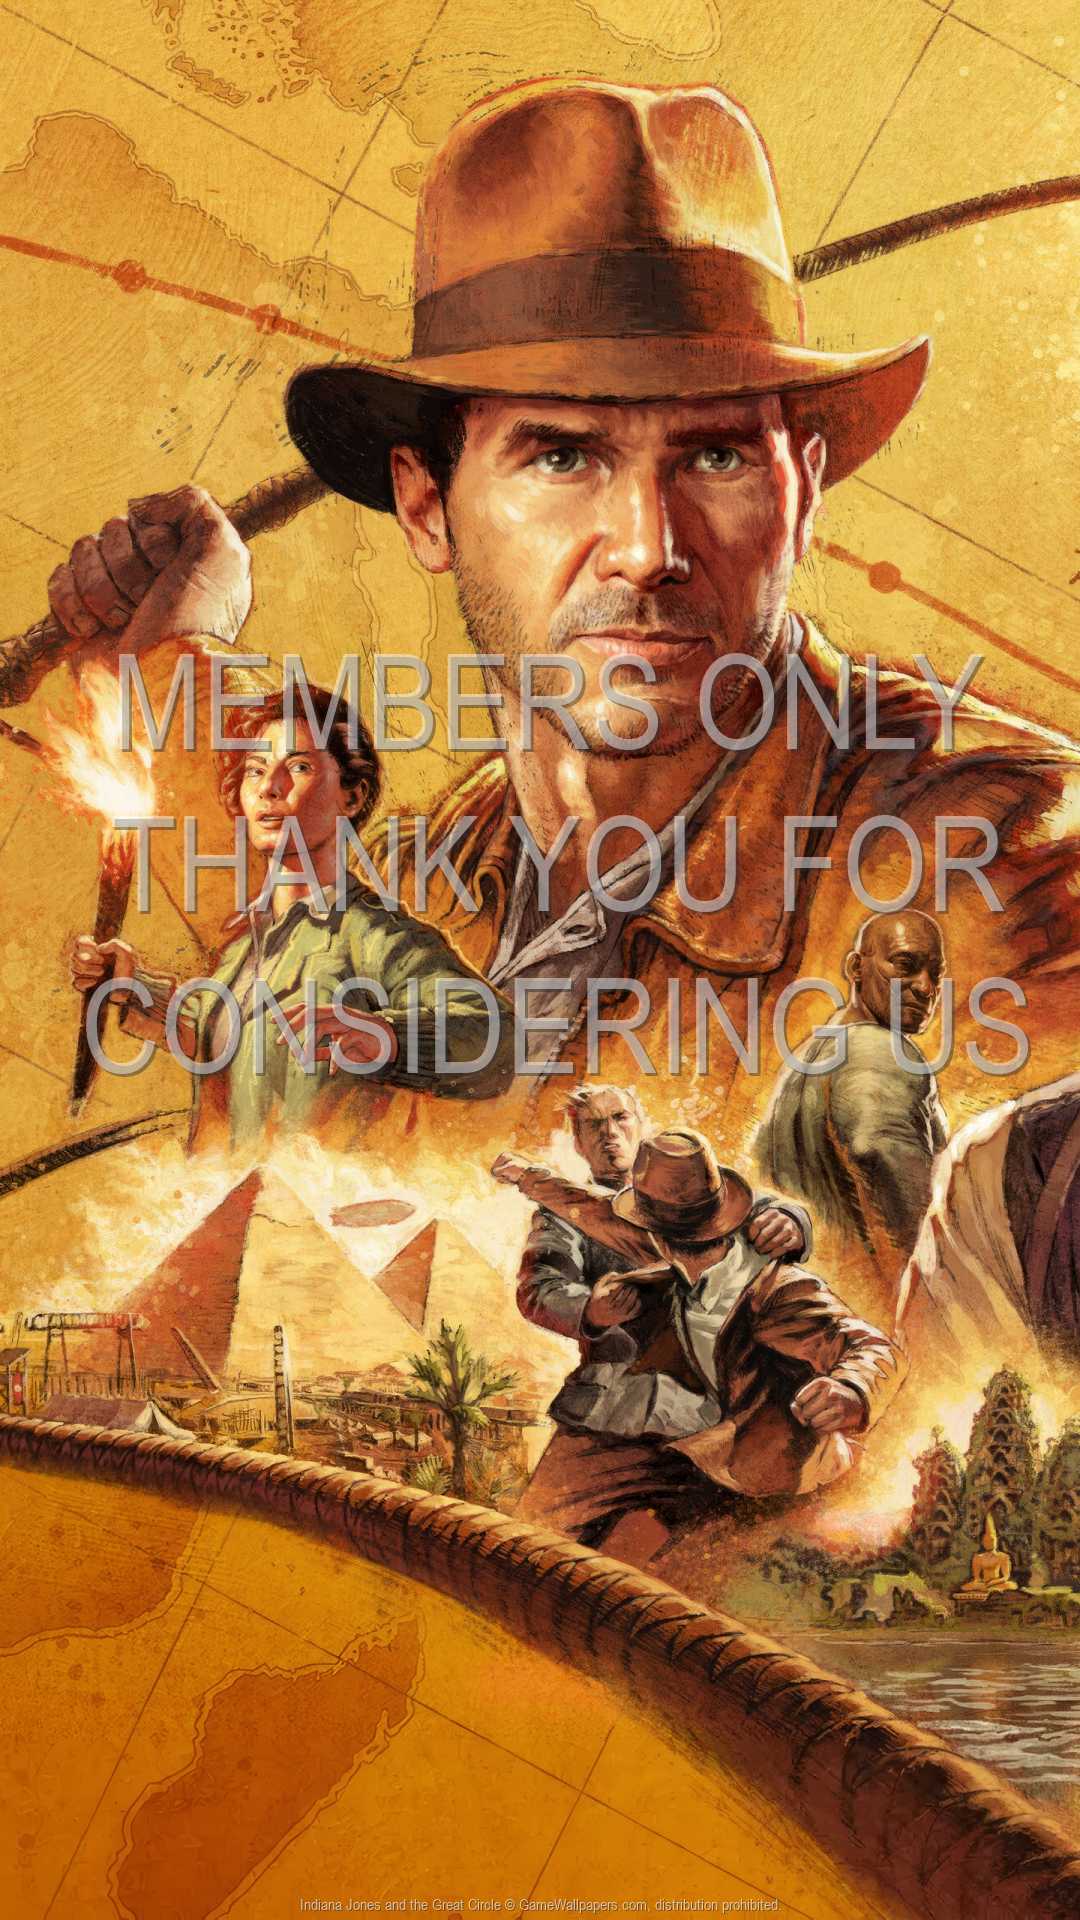 Indiana Jones and the Great Circle 1080p Vertical Mobile fond d'cran 01